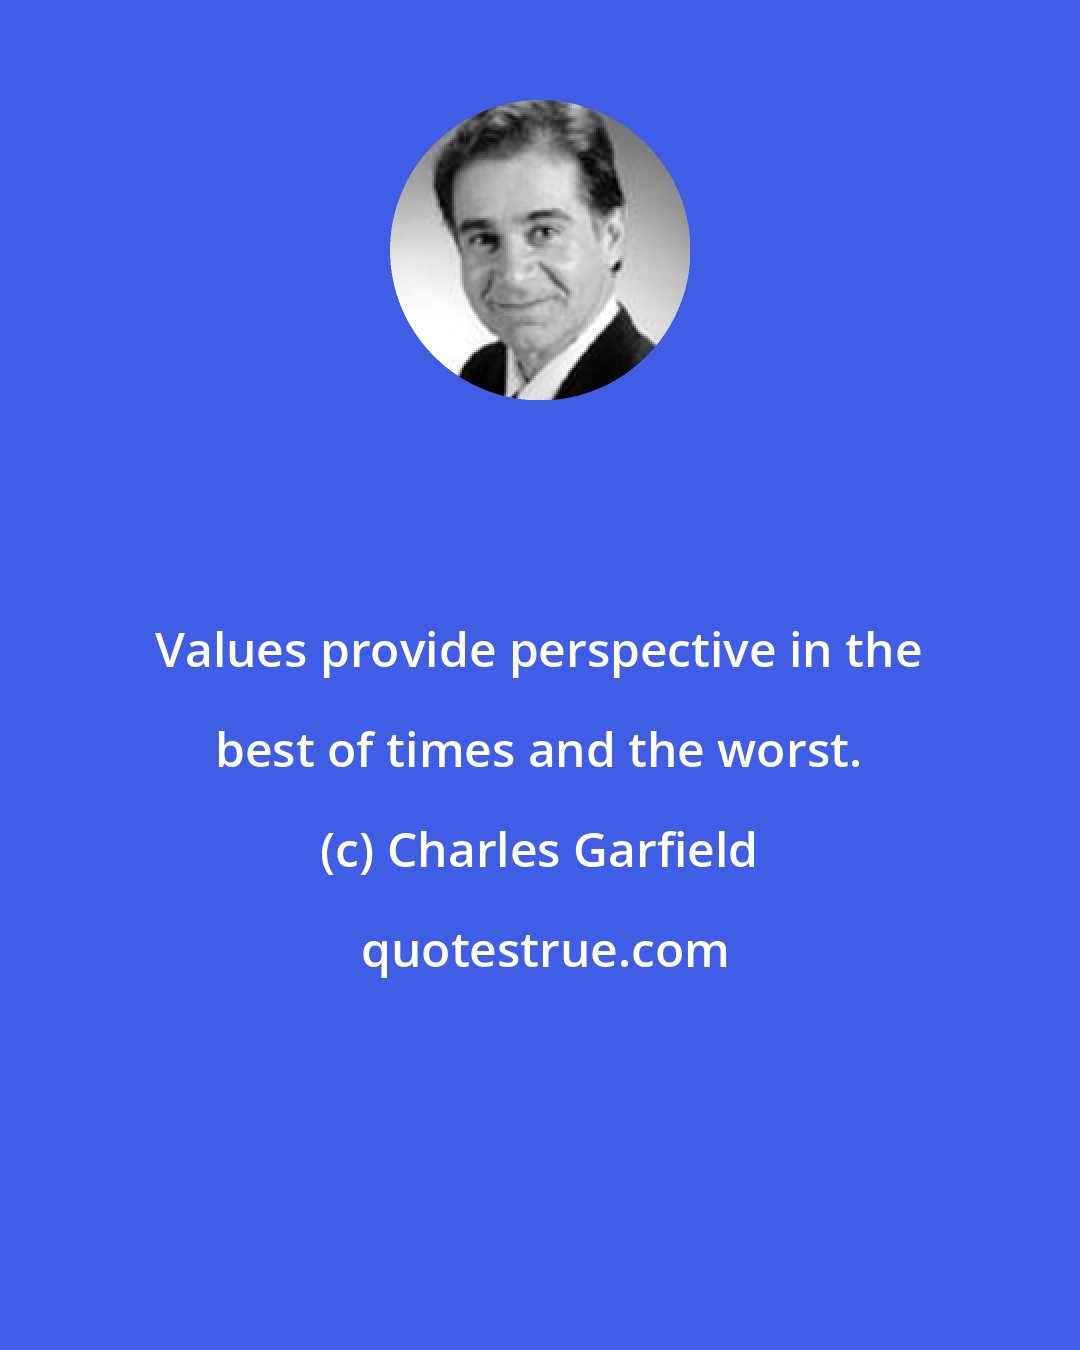 Charles Garfield: Values provide perspective in the best of times and the worst.